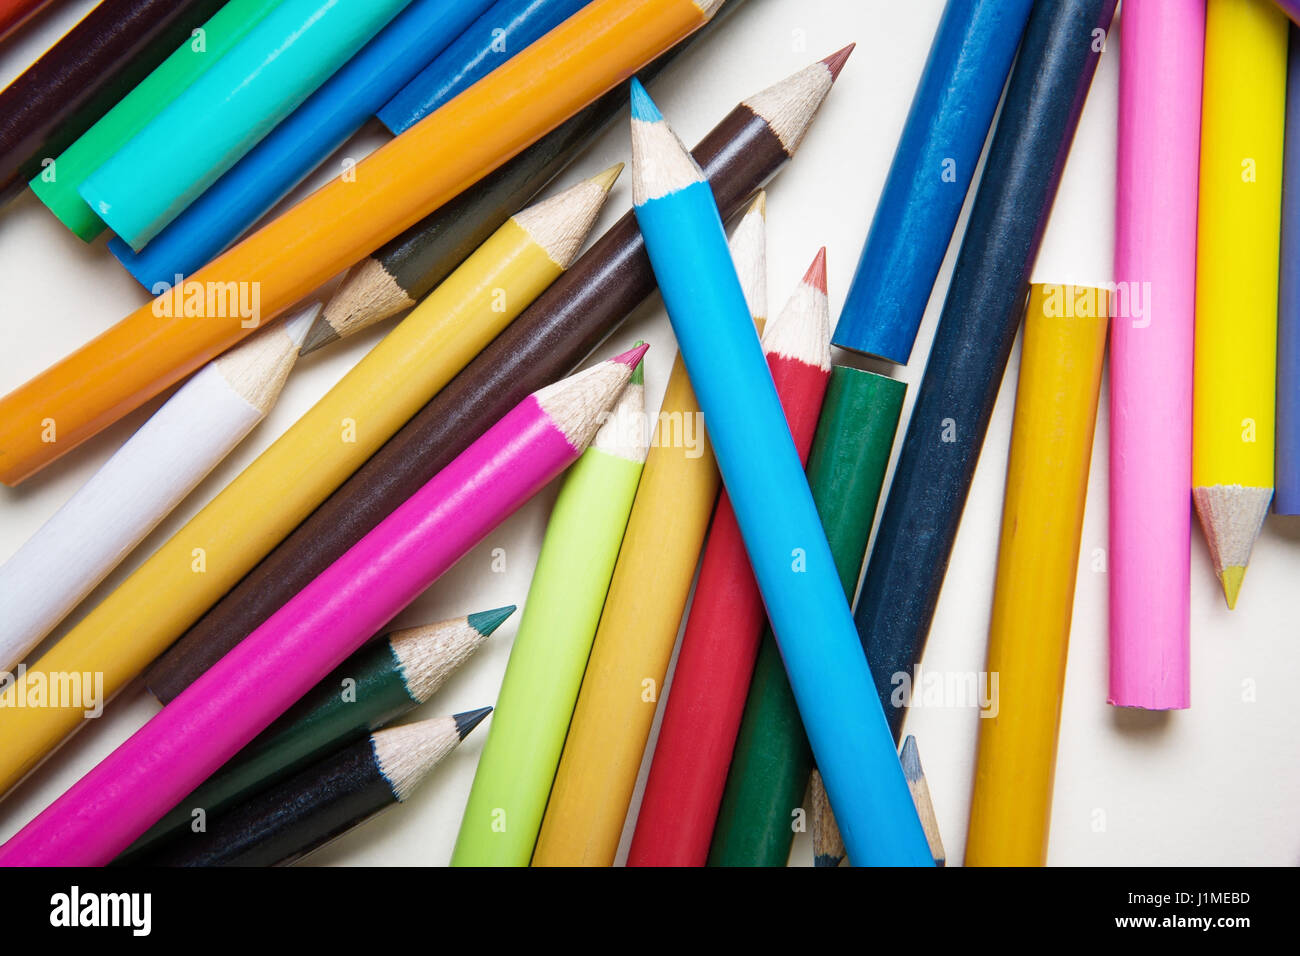 lots of colored pencils on white paper background image to add your own text if you want Stock Photo